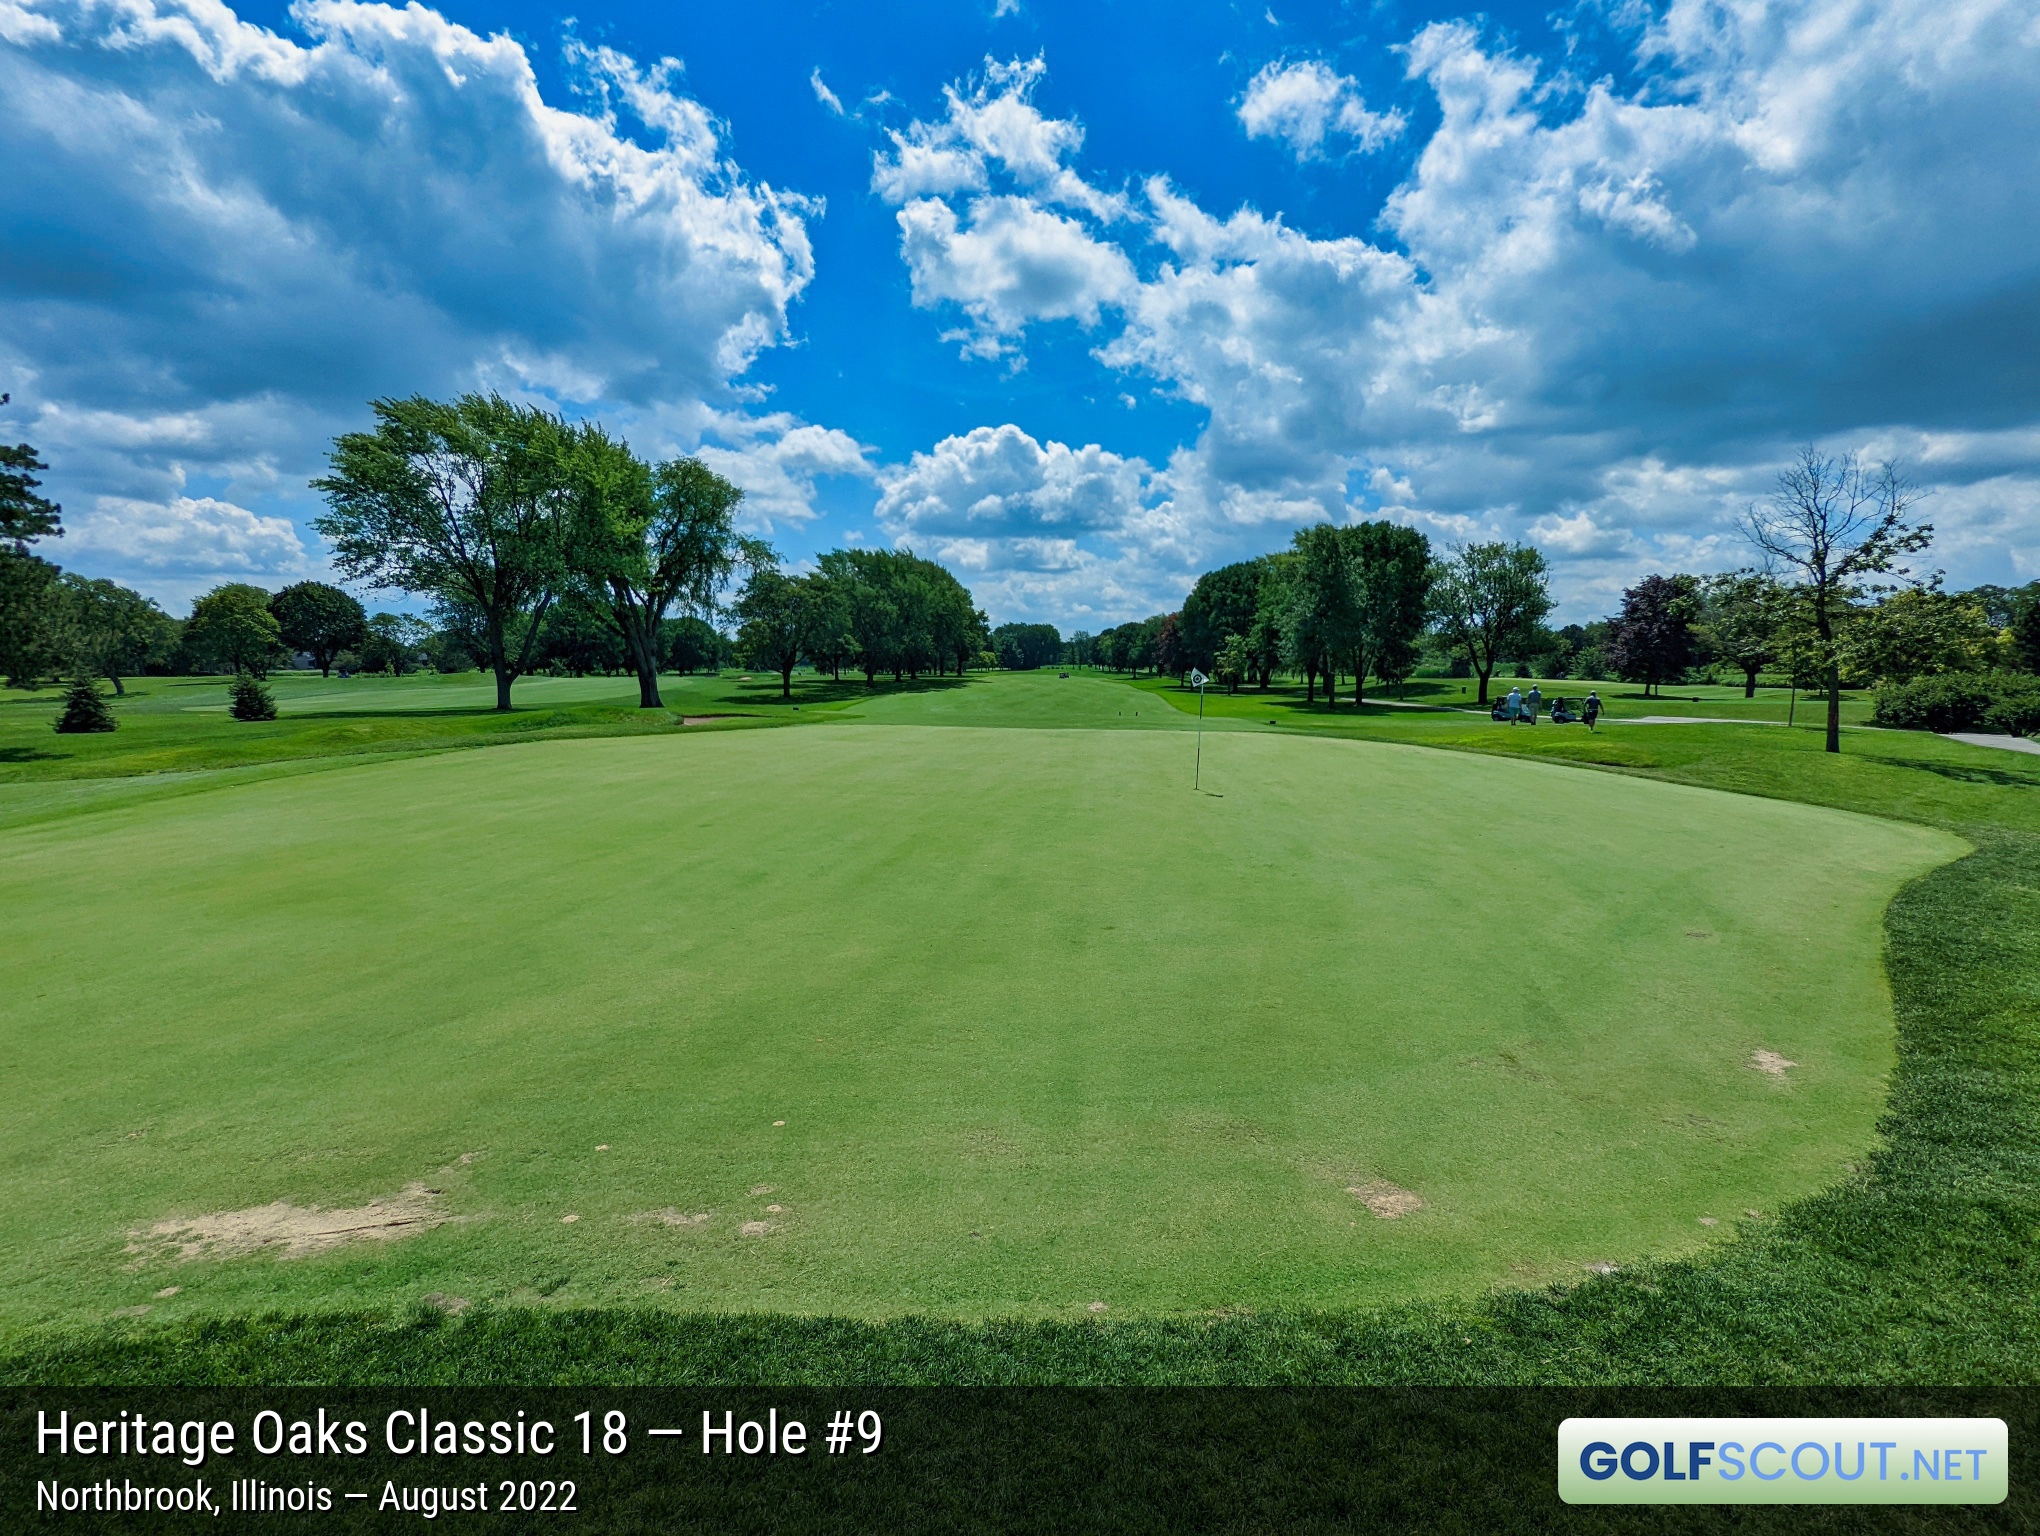 Photo of hole #9 at Heritage Oaks Golf Club - Classic 18 in Northbrook, Illinois. 